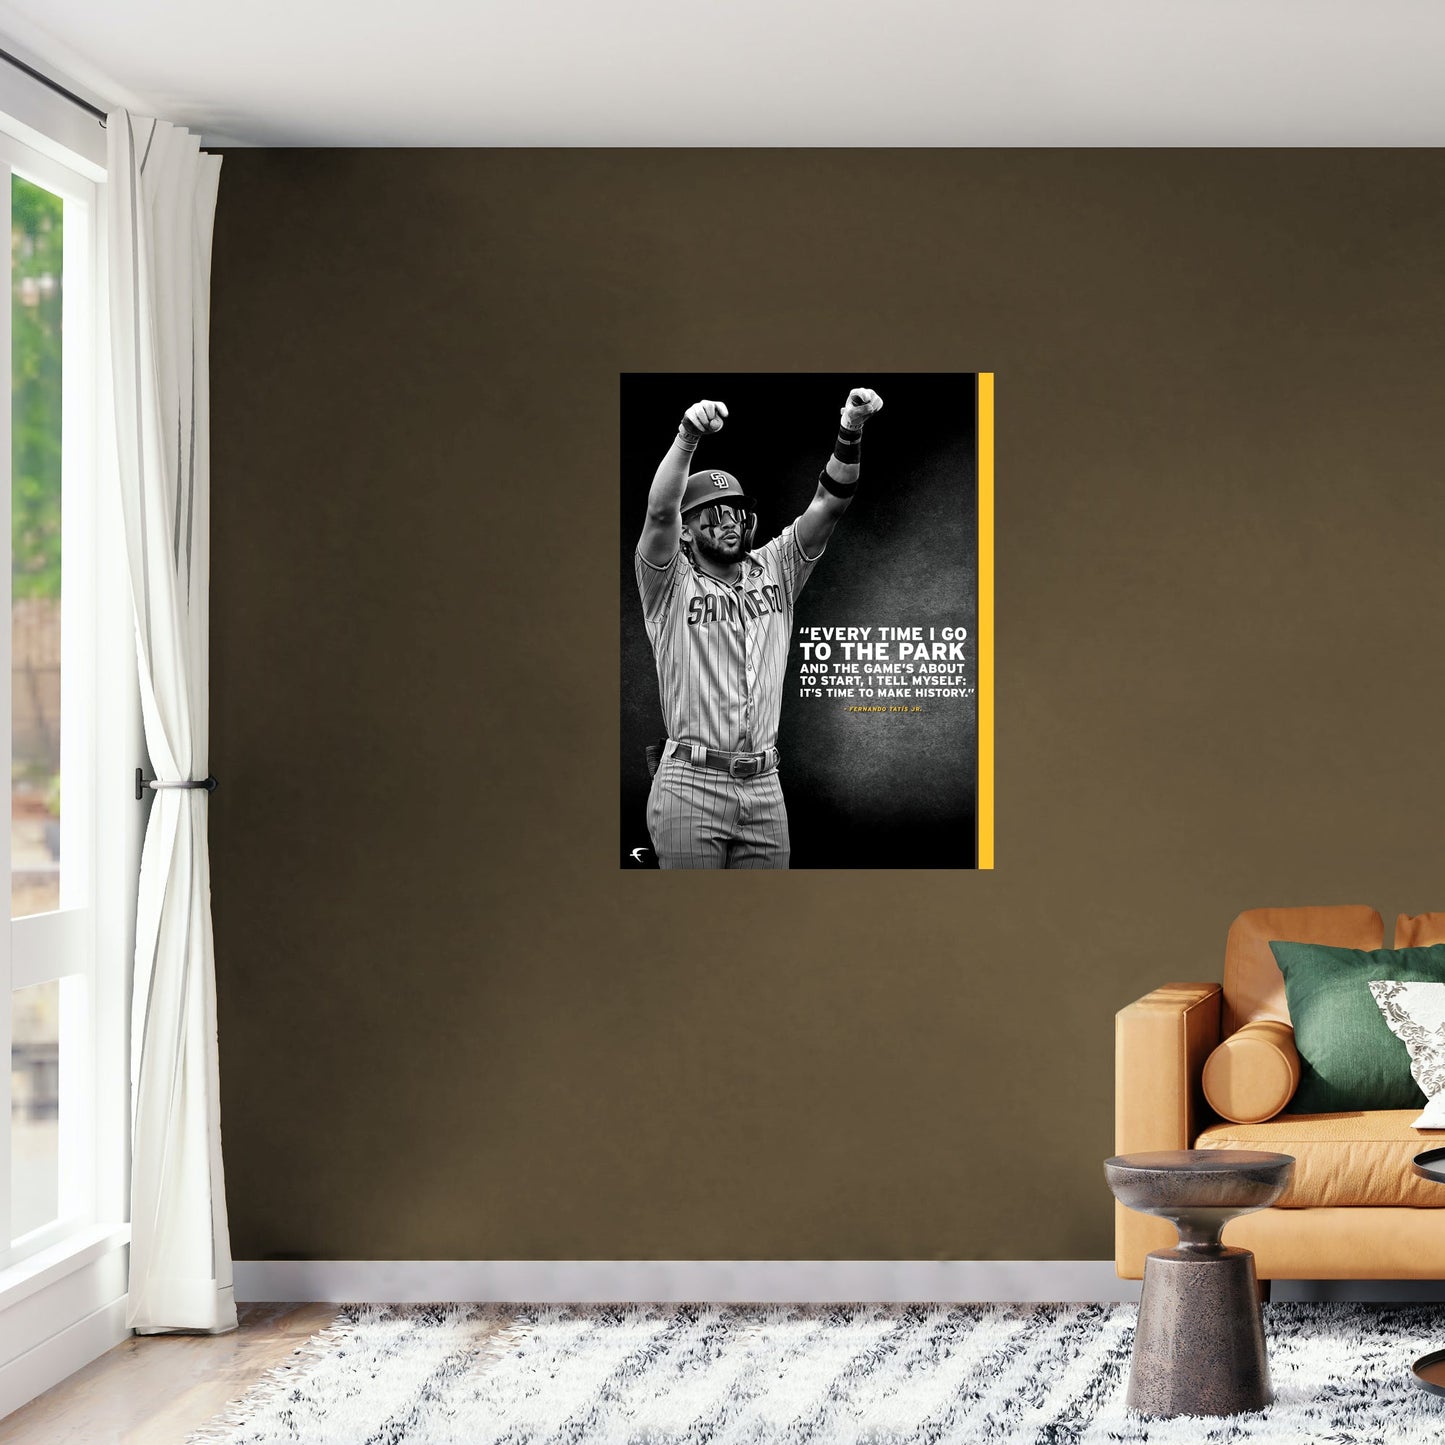 San Diego Padres: Fernando Tatis Jr. Inspirational Poster - Officially Licensed MLB Removable Adhesive Decal